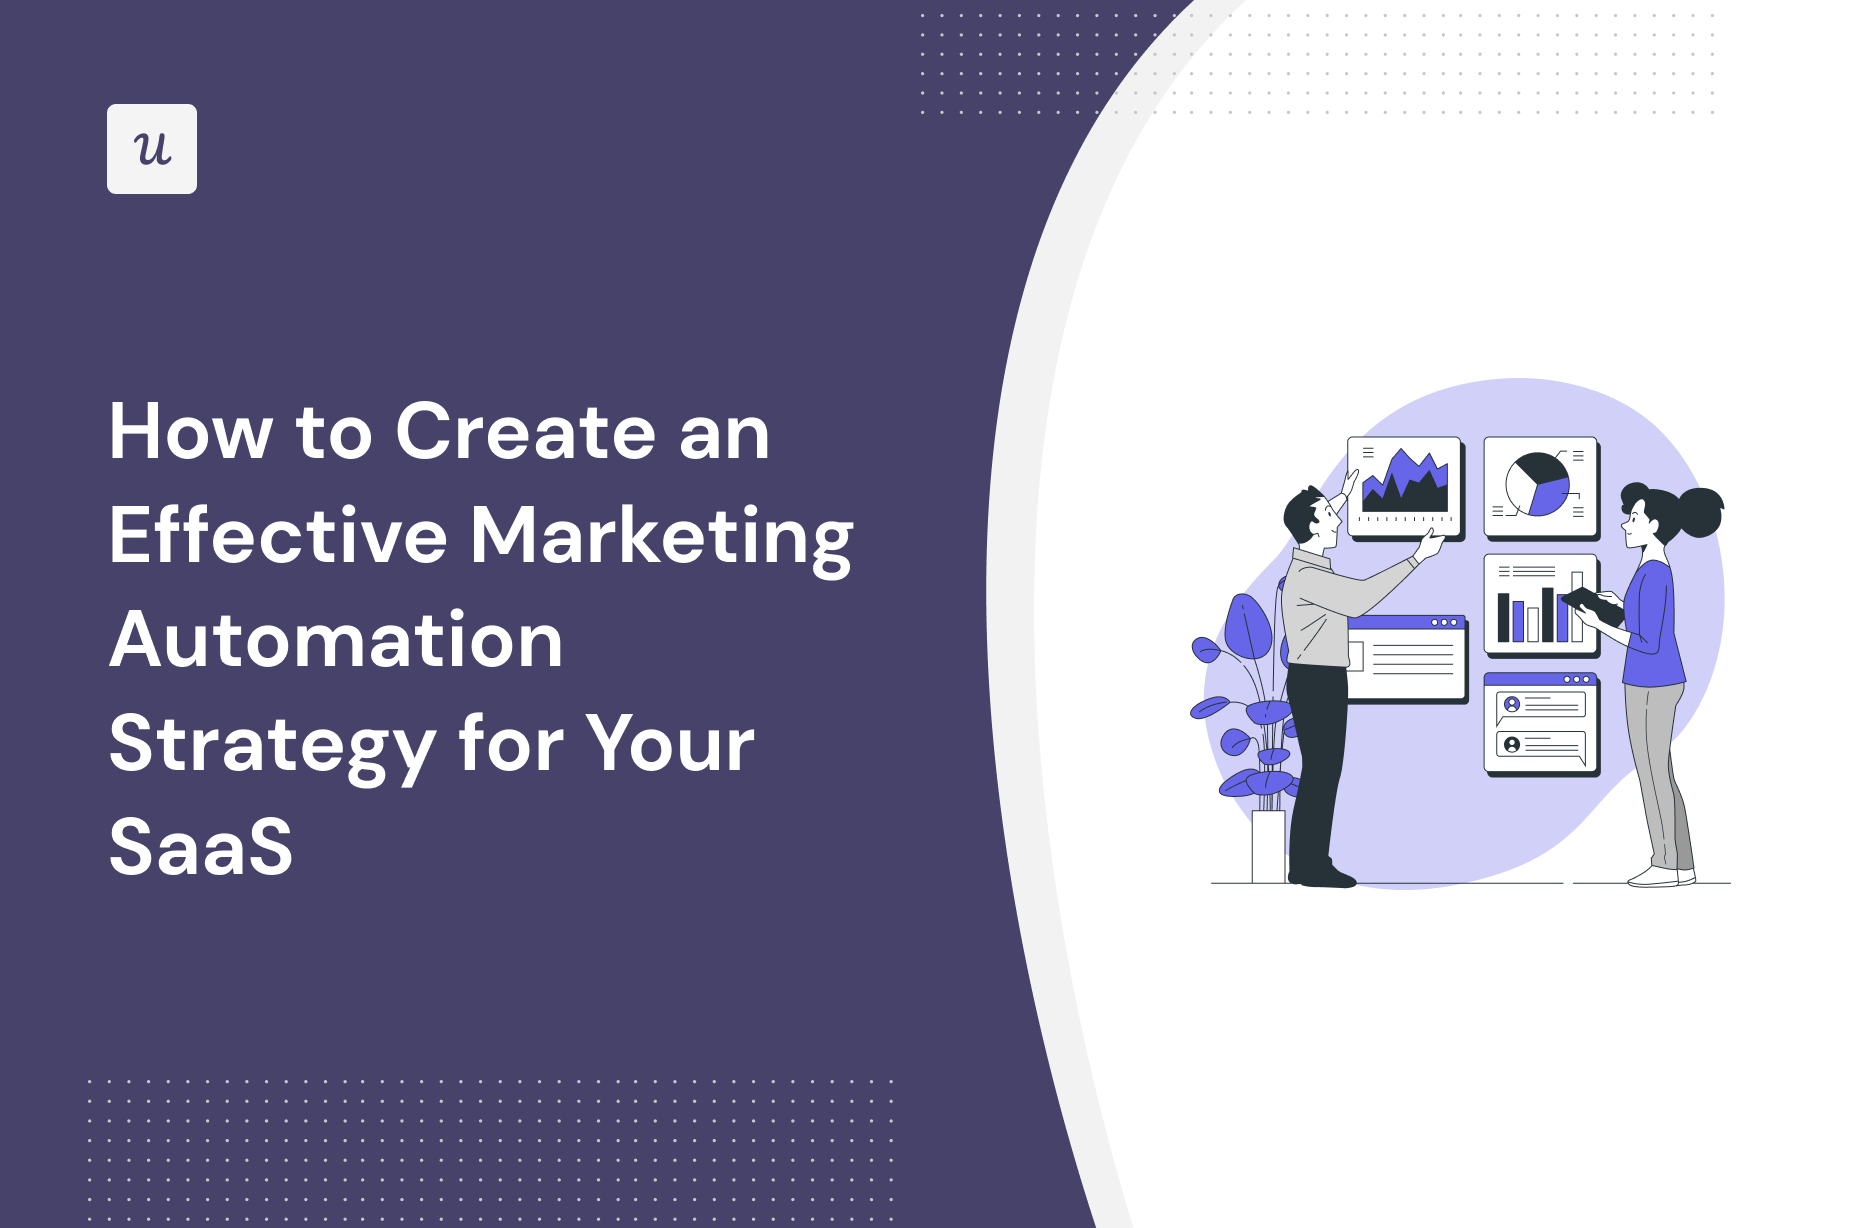 How to Create an Effective Marketing Automation Strategy for Your SaaS